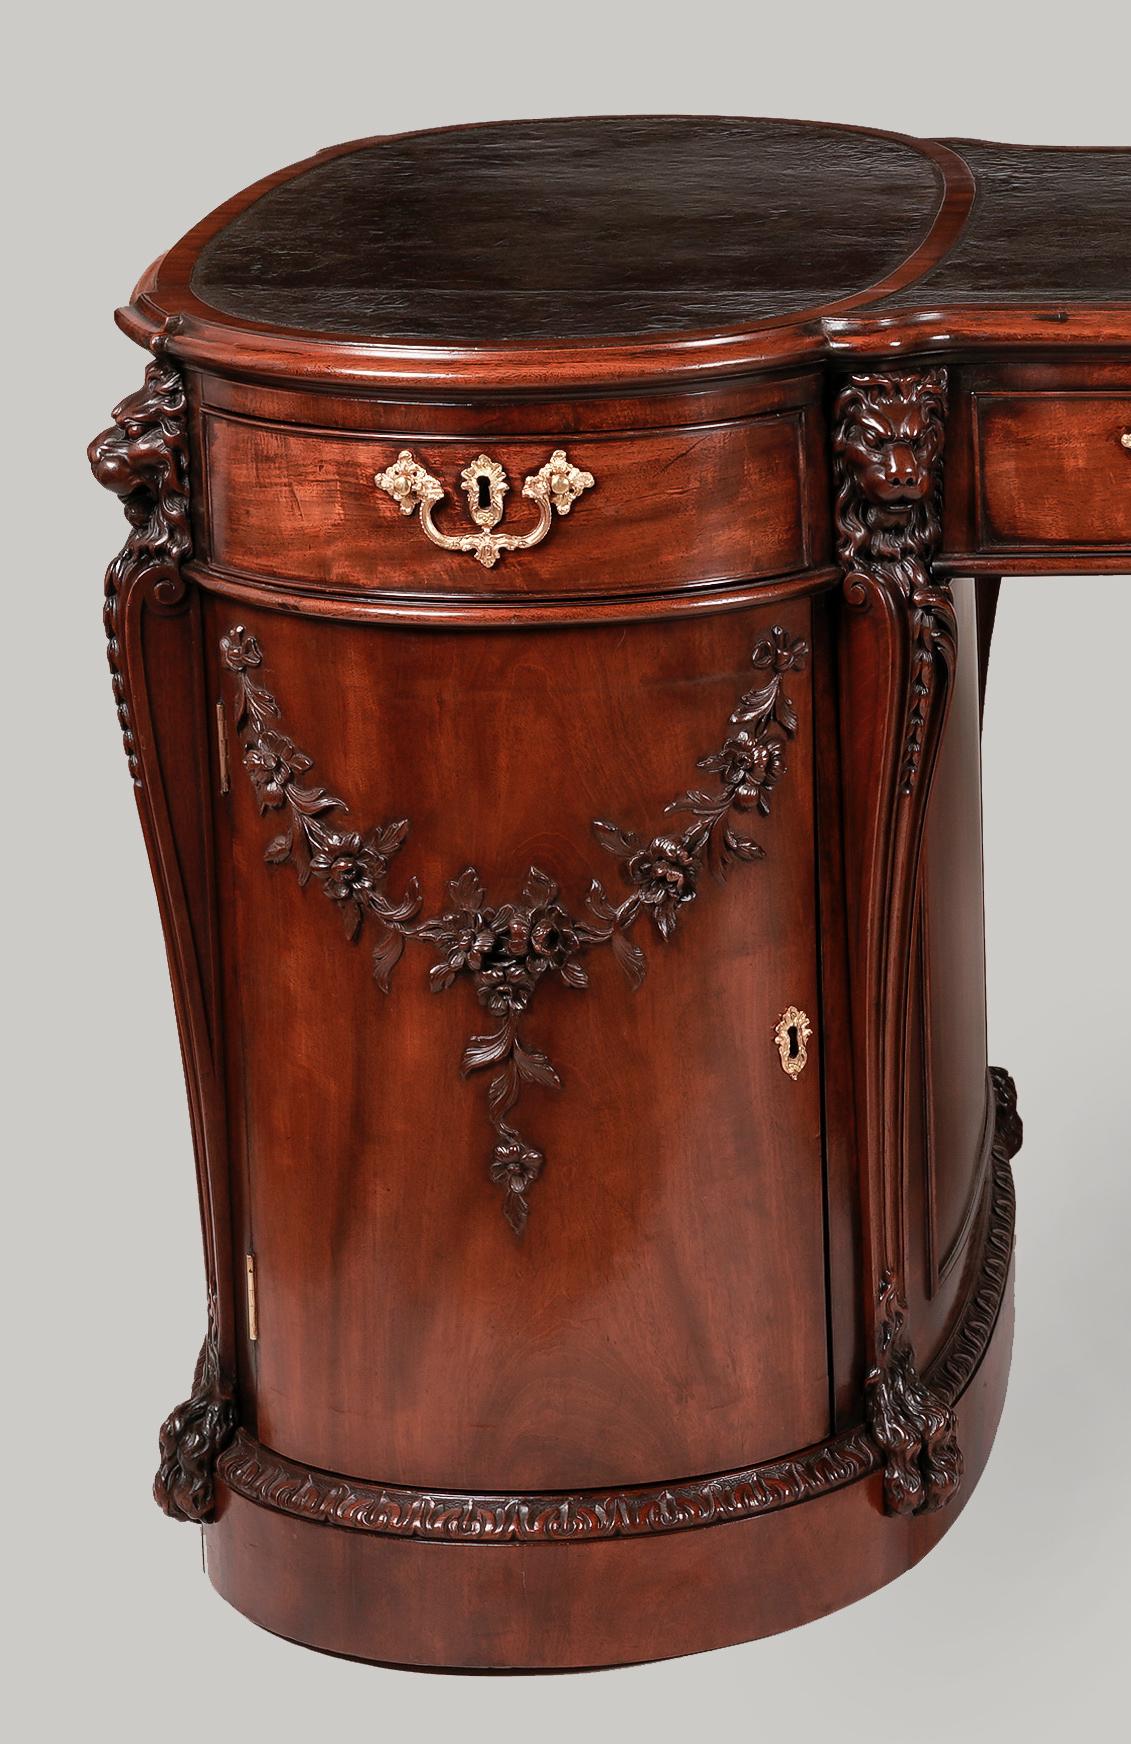 A high quality partners library table
By H Samuel of Oxford street

The design by Thomas Chippendale


Constructed in mahogany, of hour-glass shape, the plinth base having stiff-leaf carved mouldings; nine cock beaded drawers with swan gilt